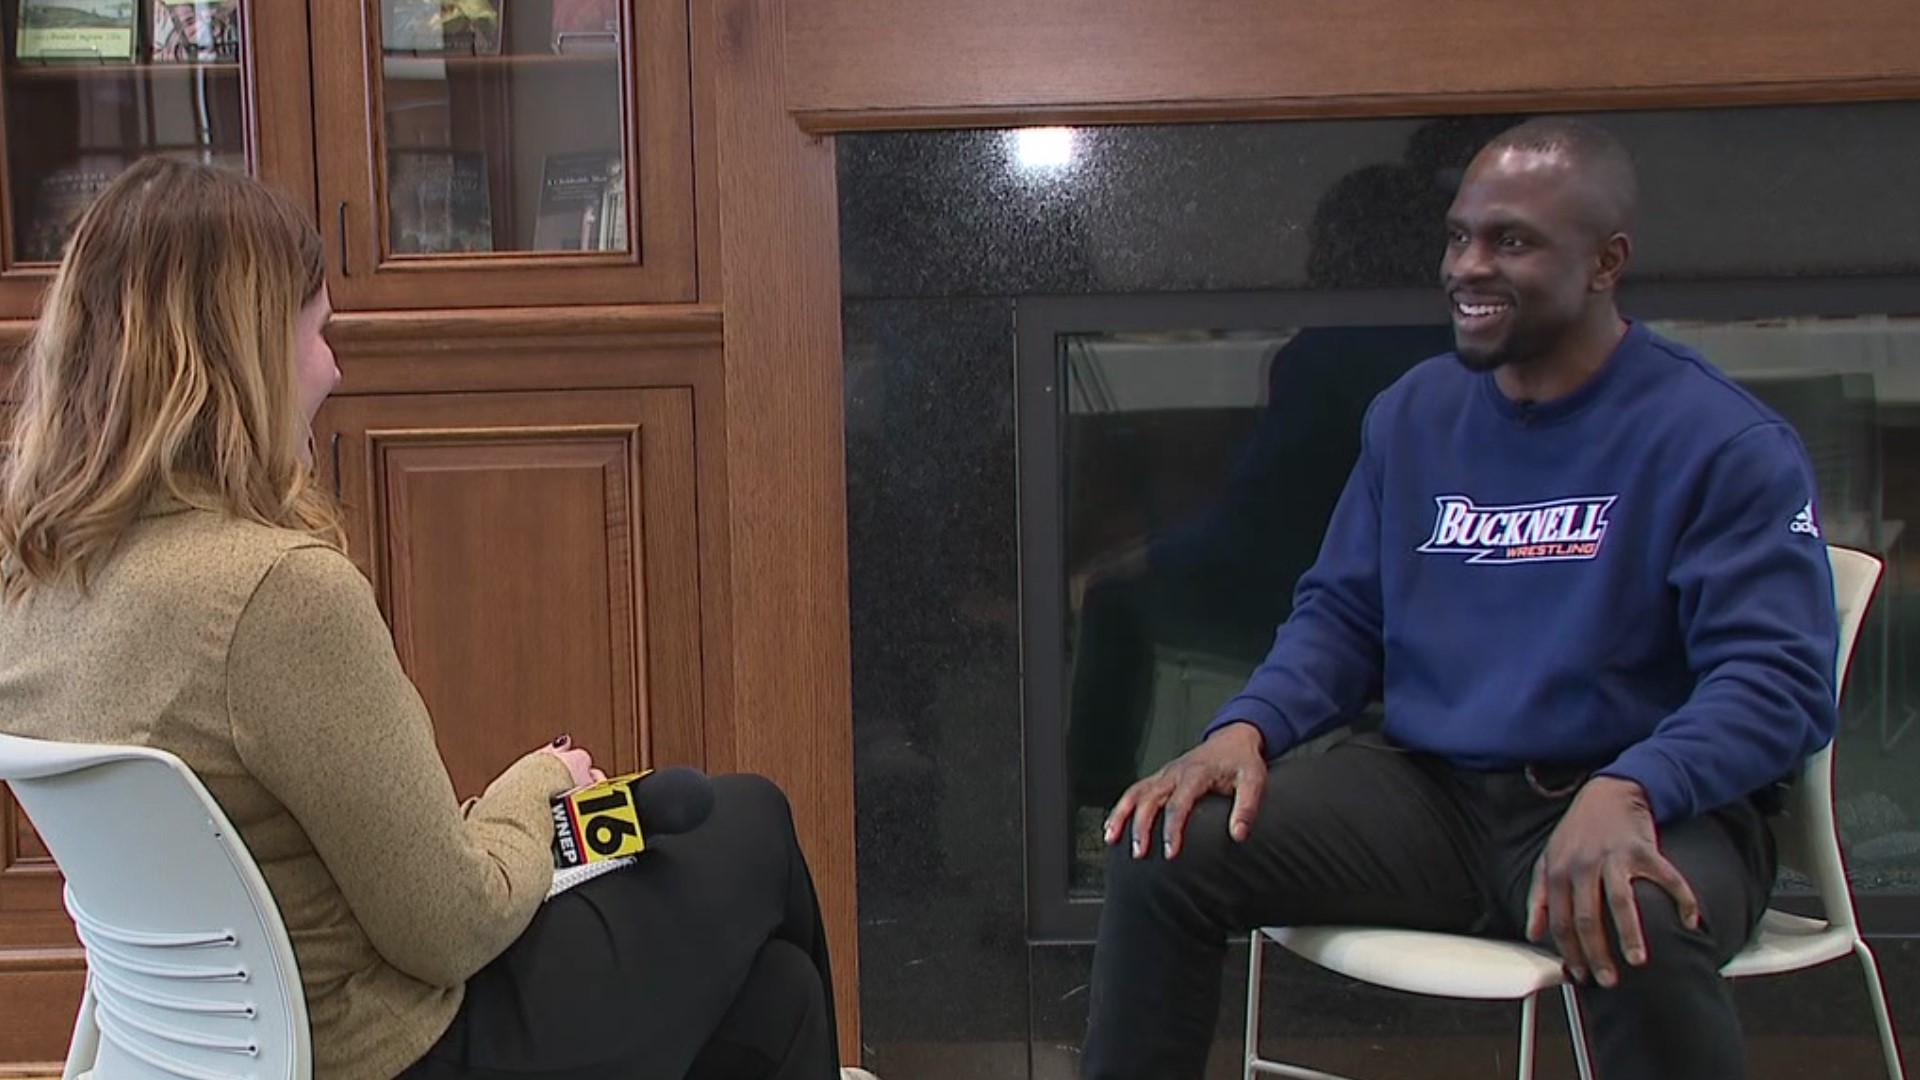 Newswatch 16's Nikki Krize recently caught up with Bucknell alumnus Gbenga Akinnagbe during a return trip to Lewisburg.